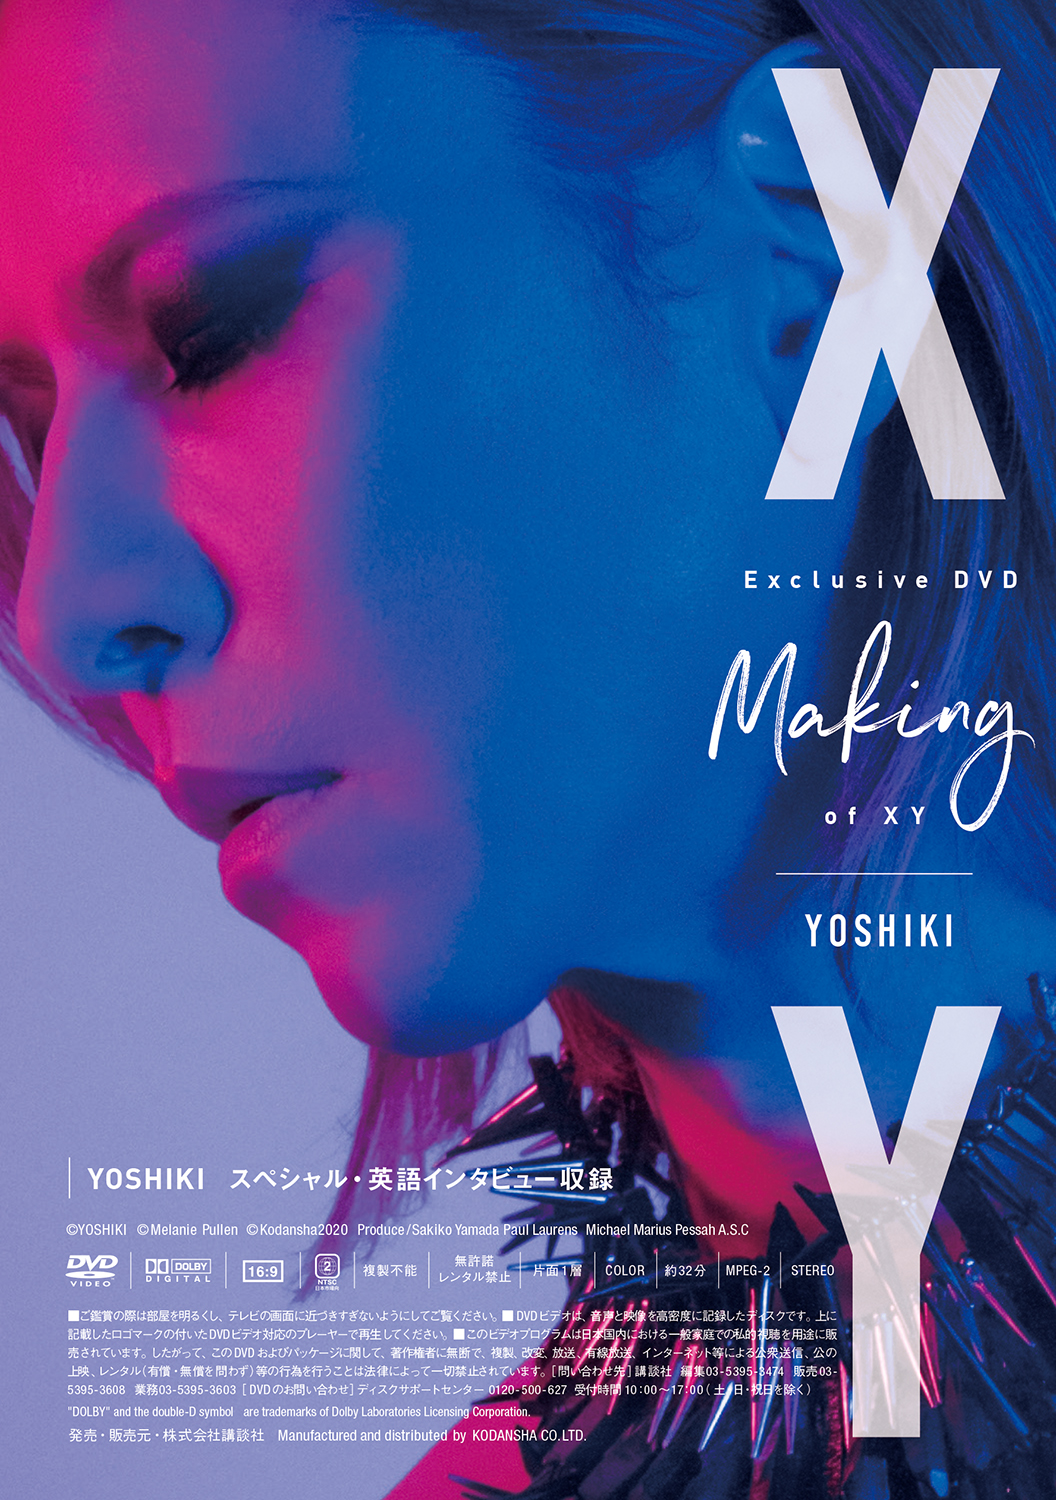 Press Release: YOSHIKI Fashion Photobook “XY” to be released in